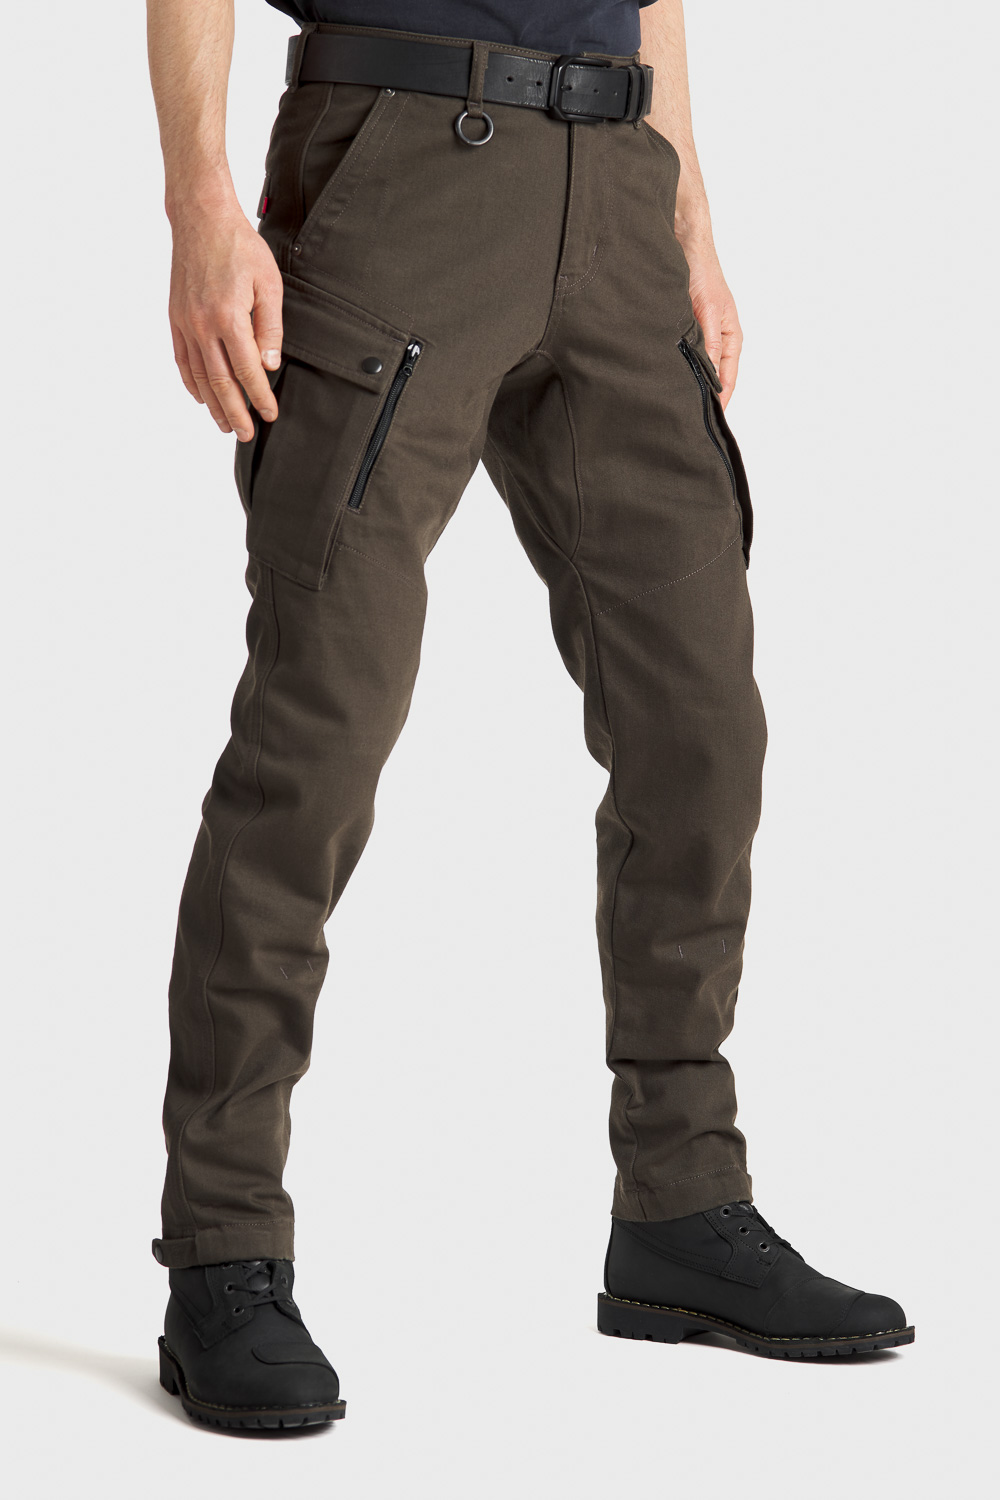 Mens Motorcycle Jeans Motorbike Pants Reinforced Jeans Made With DuPont™ Kevlar® 